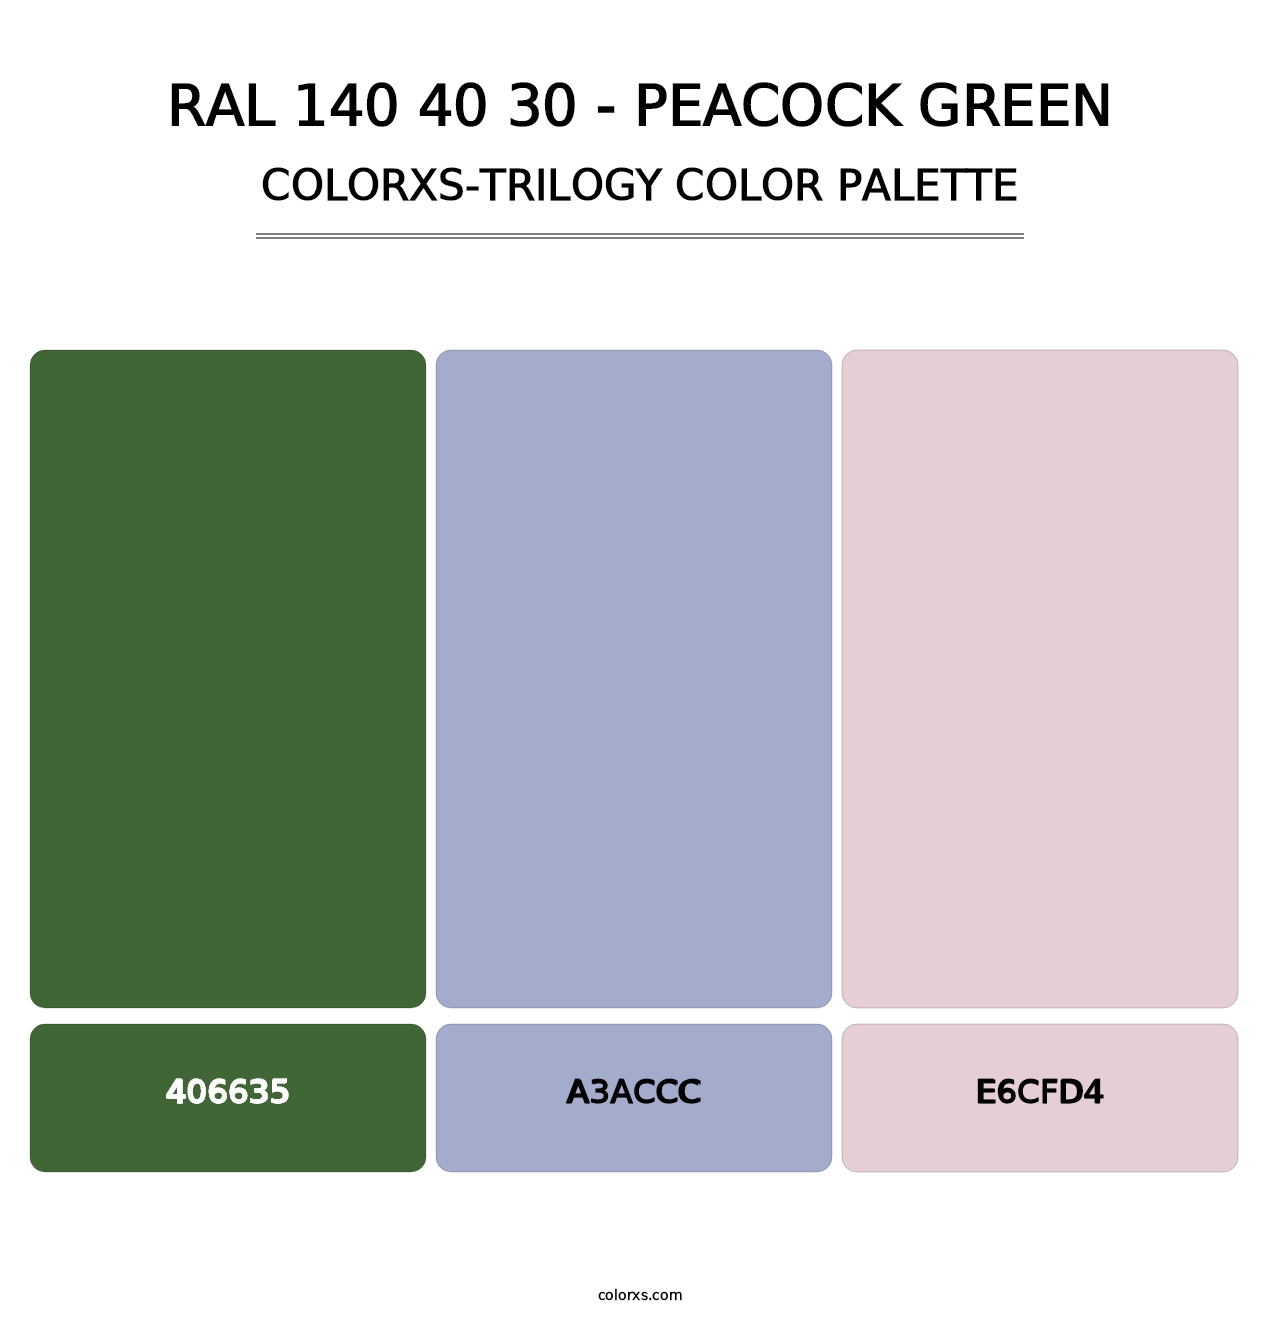 RAL 140 40 30 - Peacock Green - Colorxs Trilogy Palette